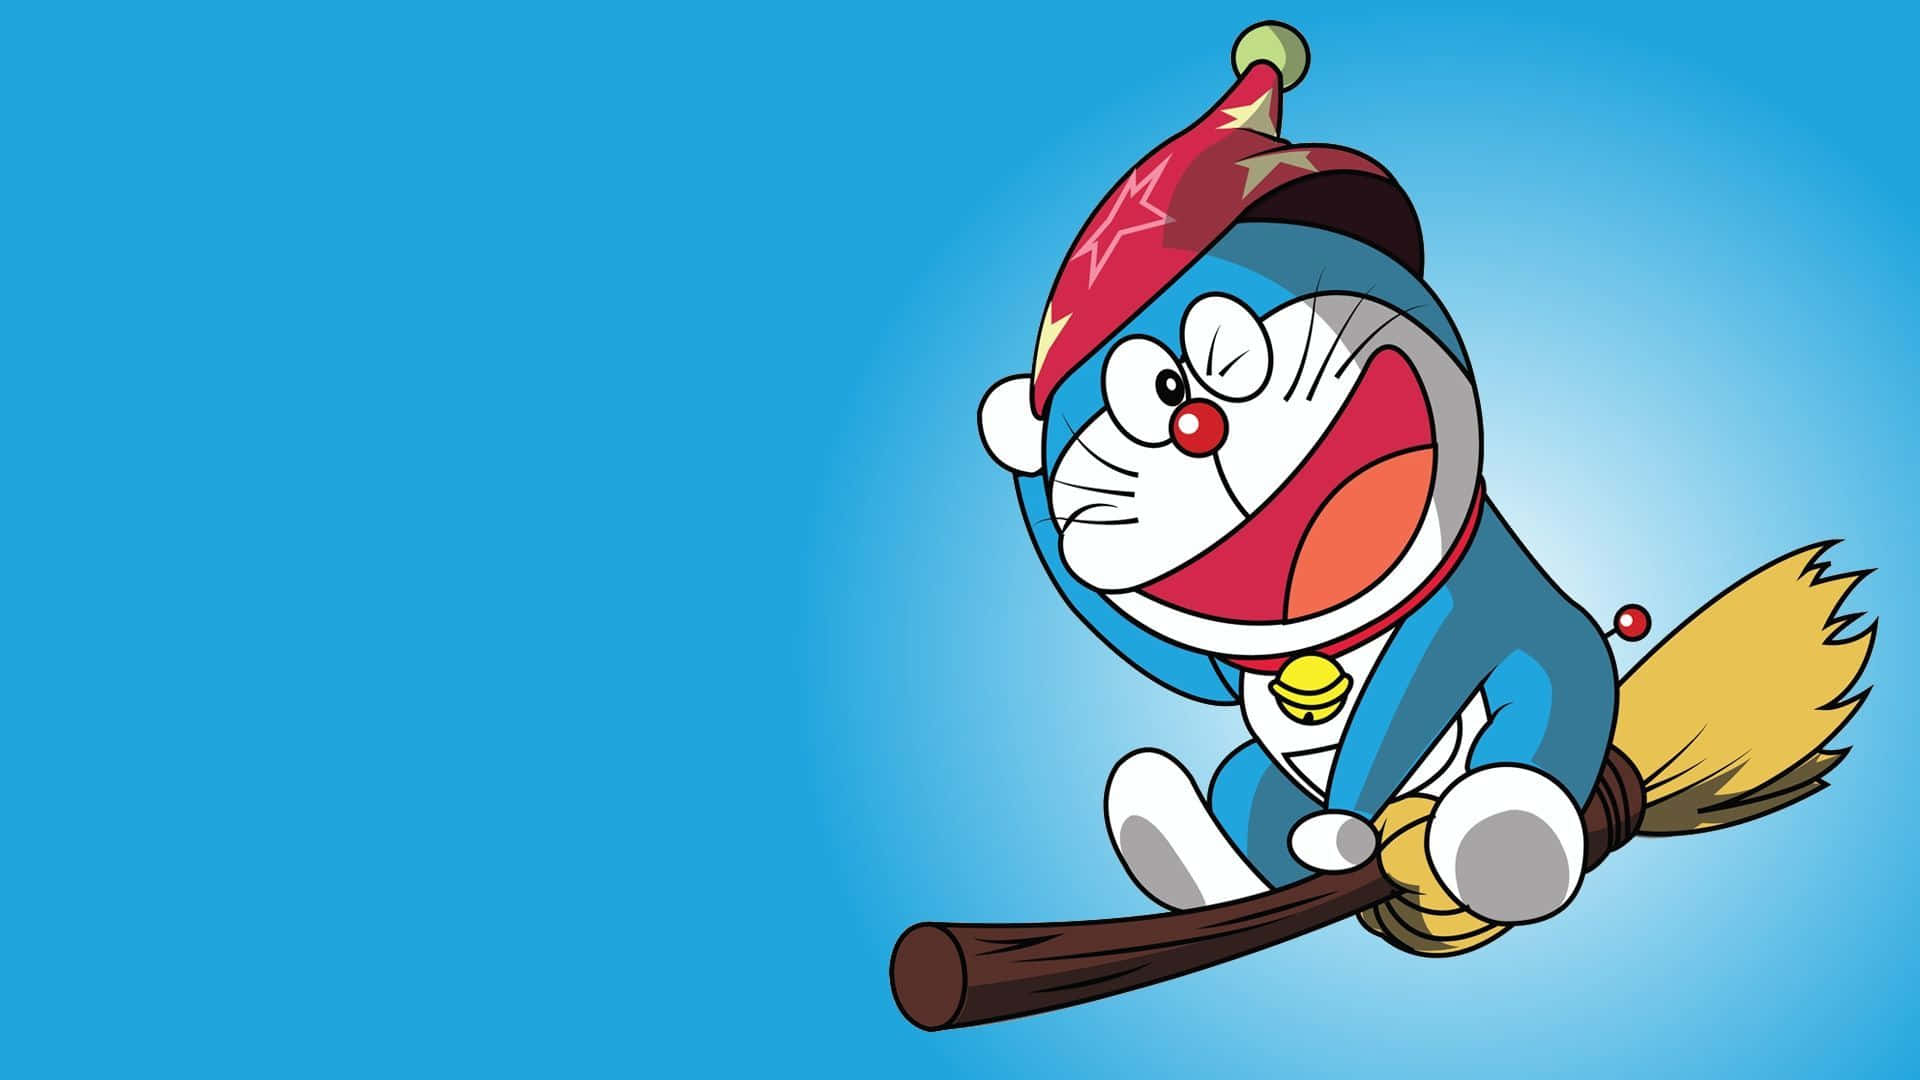 The lovable robot cat Doraemon, tasked with aiding Nobita in his adventures